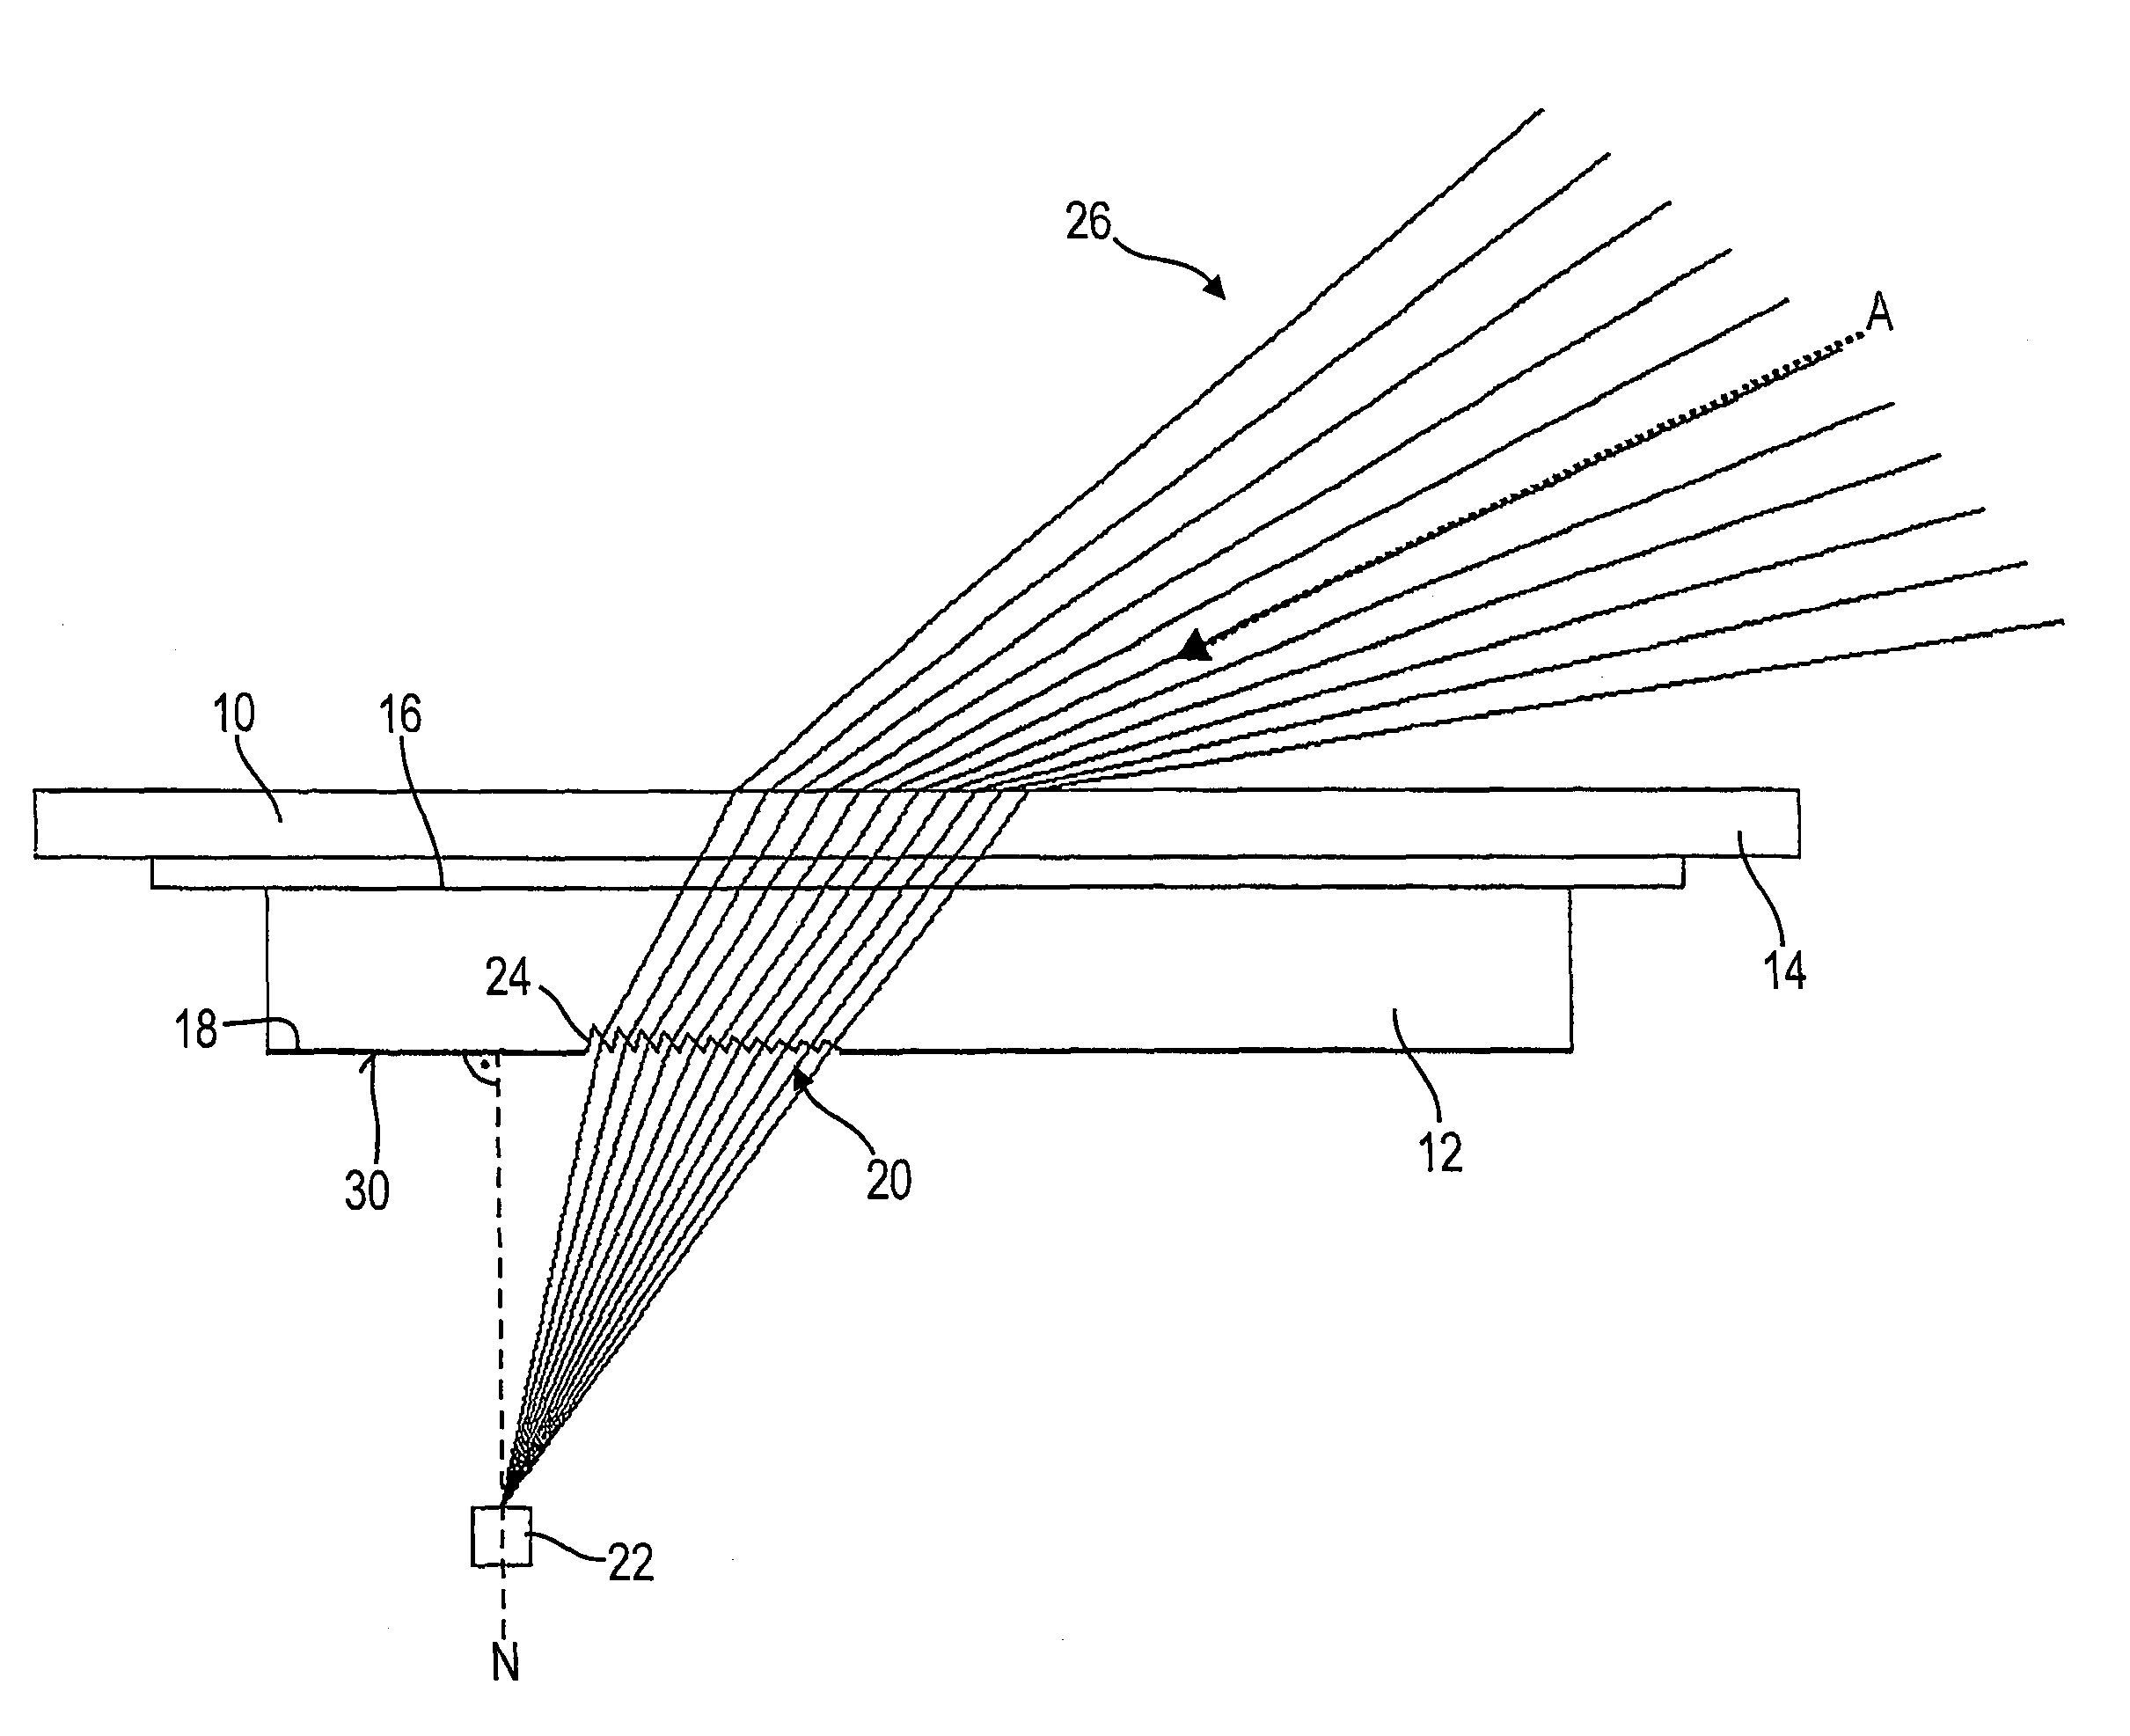 Optical sensing device for detecting ambient light in motor vehicles comprising a prism structure having a plurality of prisms designed to direct rays of a specific ambient light beam